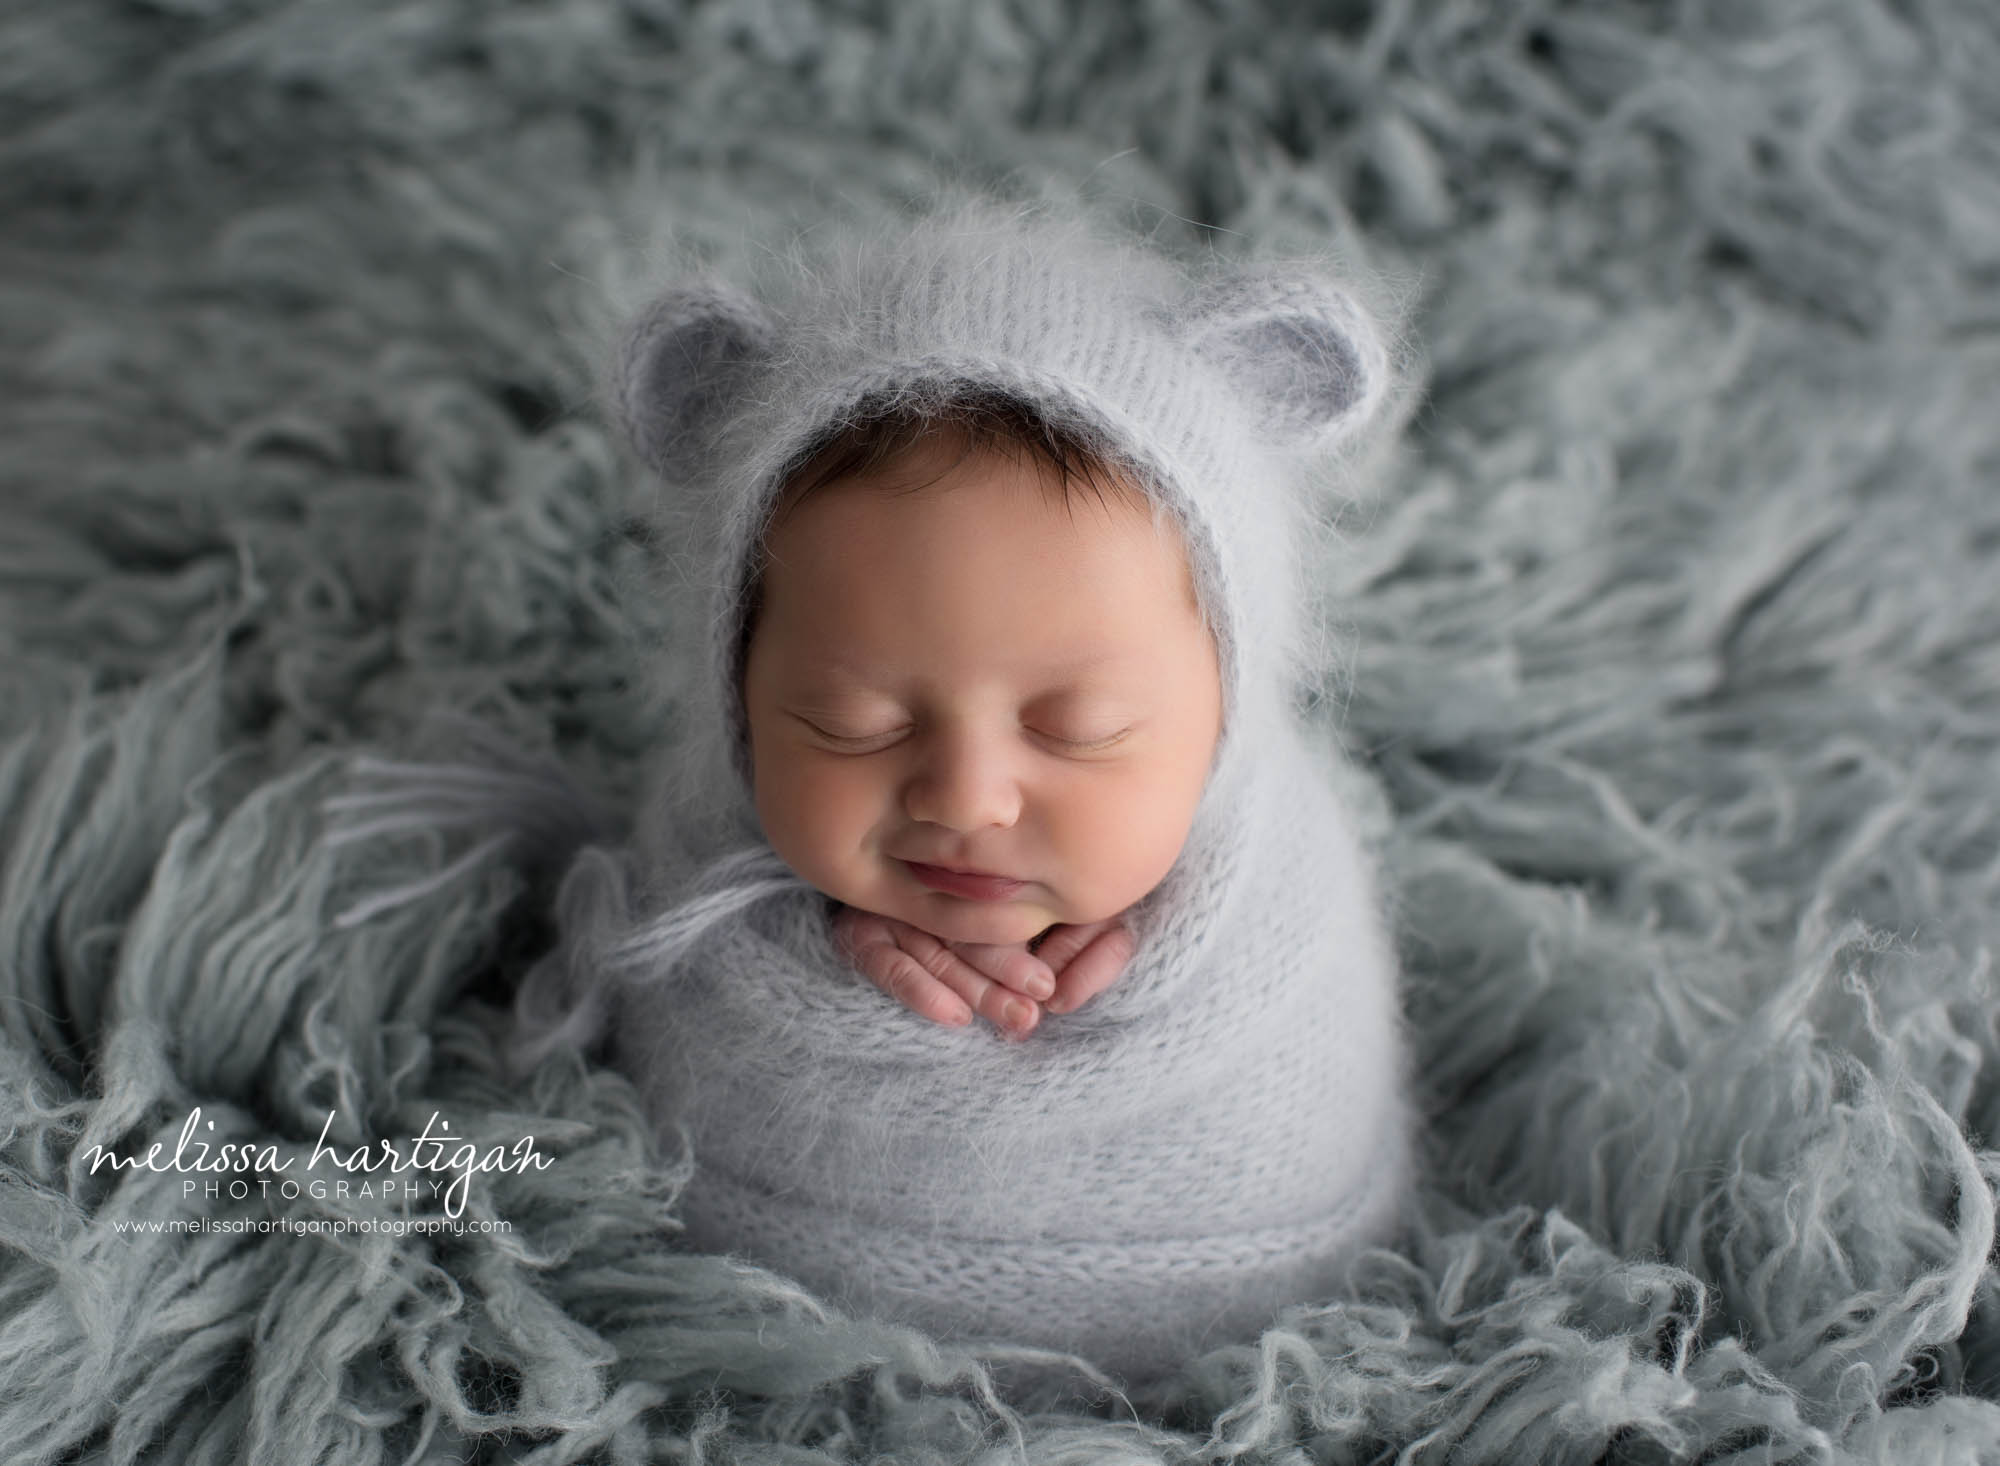 Leila CT Newborn Session baby girl sleeping wrapped in light blue knit with matching hat with ears